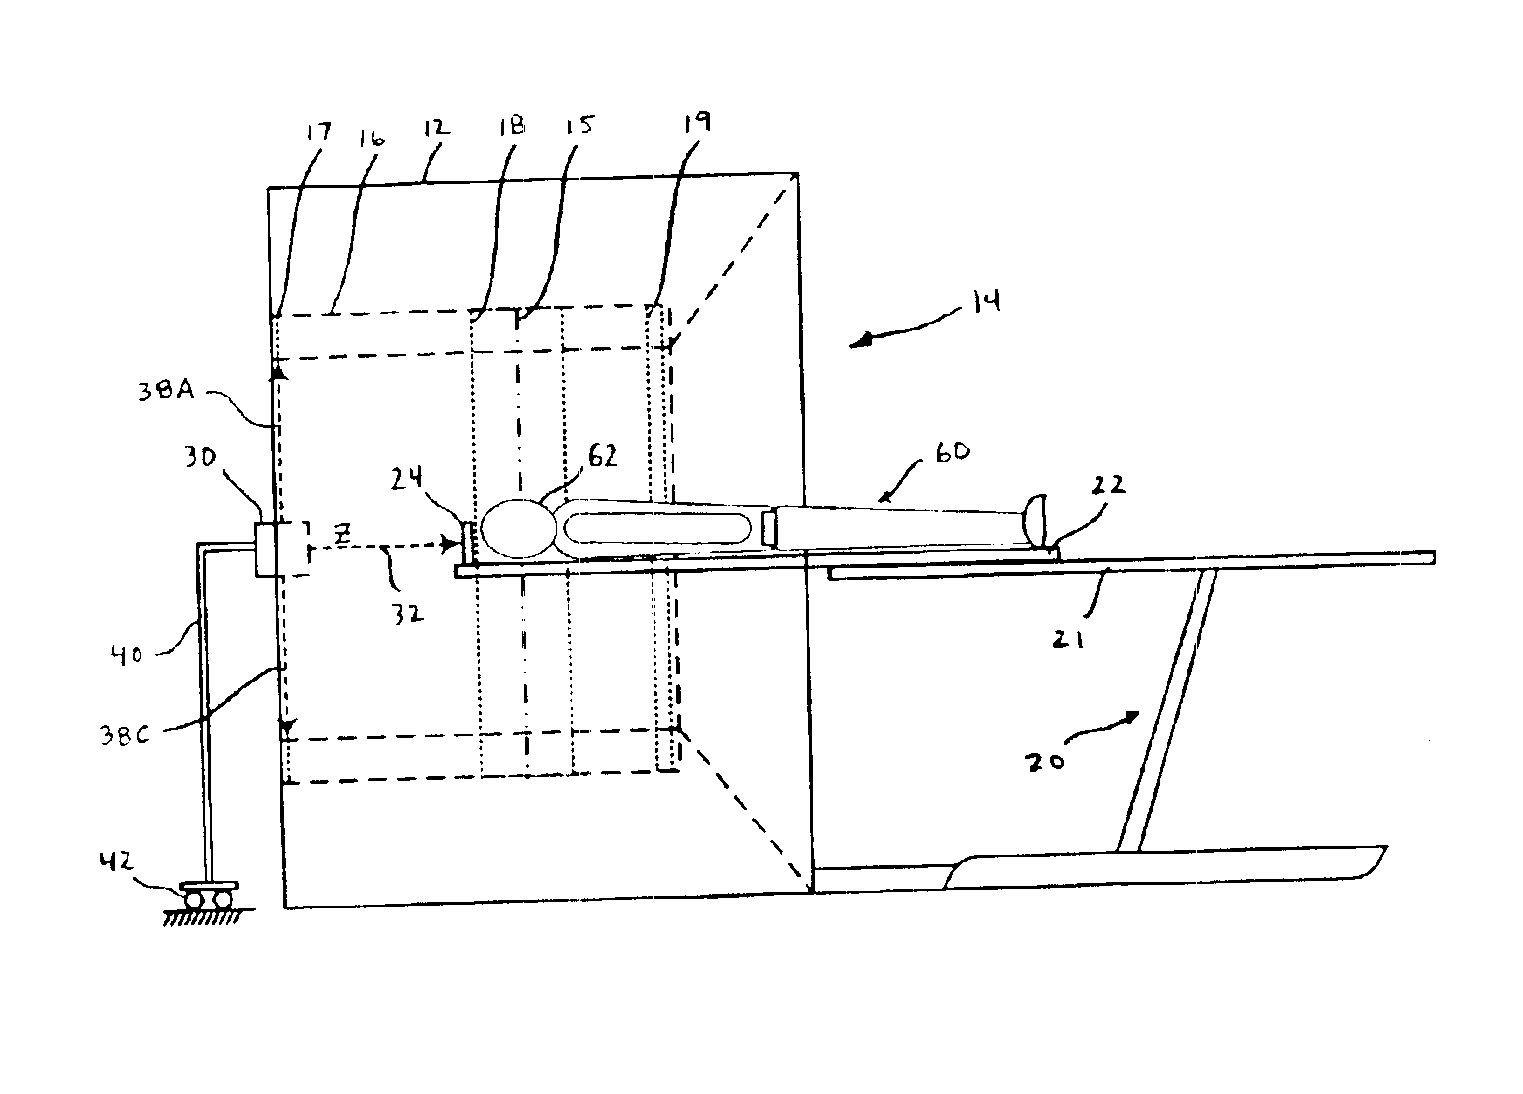 System and method for table/gantry alignment in imaging systems